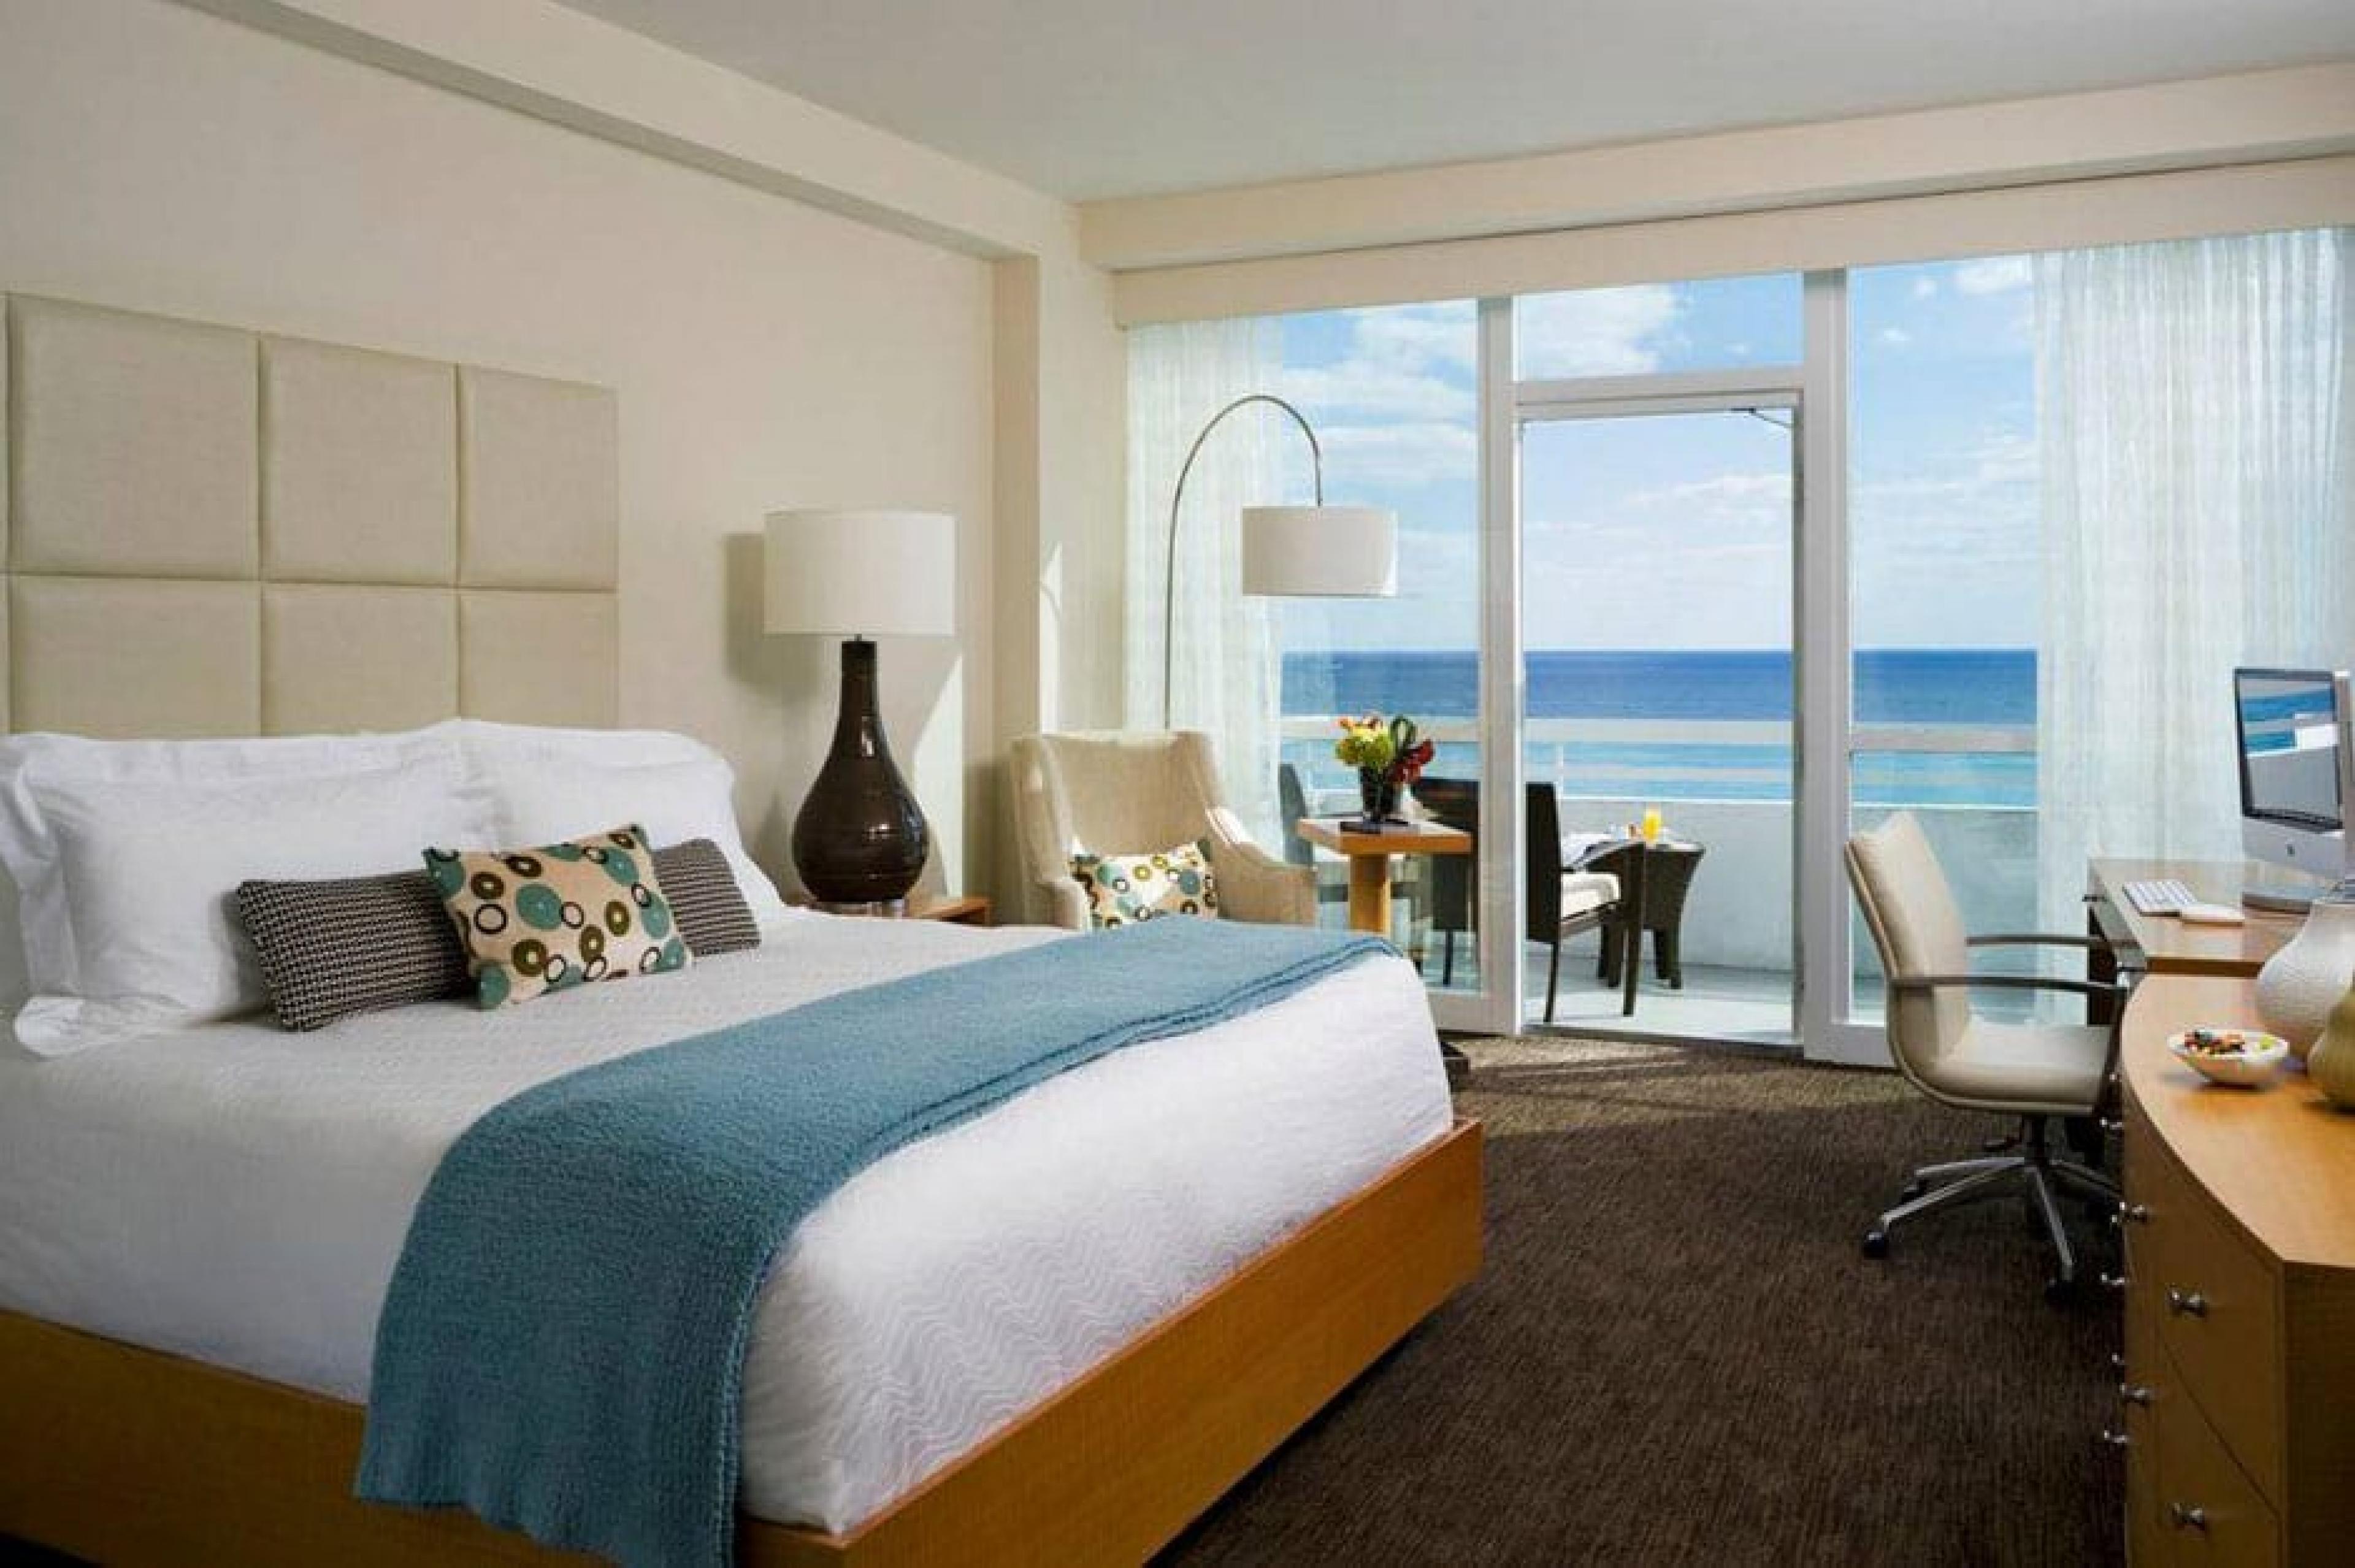 Bedroom with Balcony at Fontainebleau Hotel, Miami, Florida